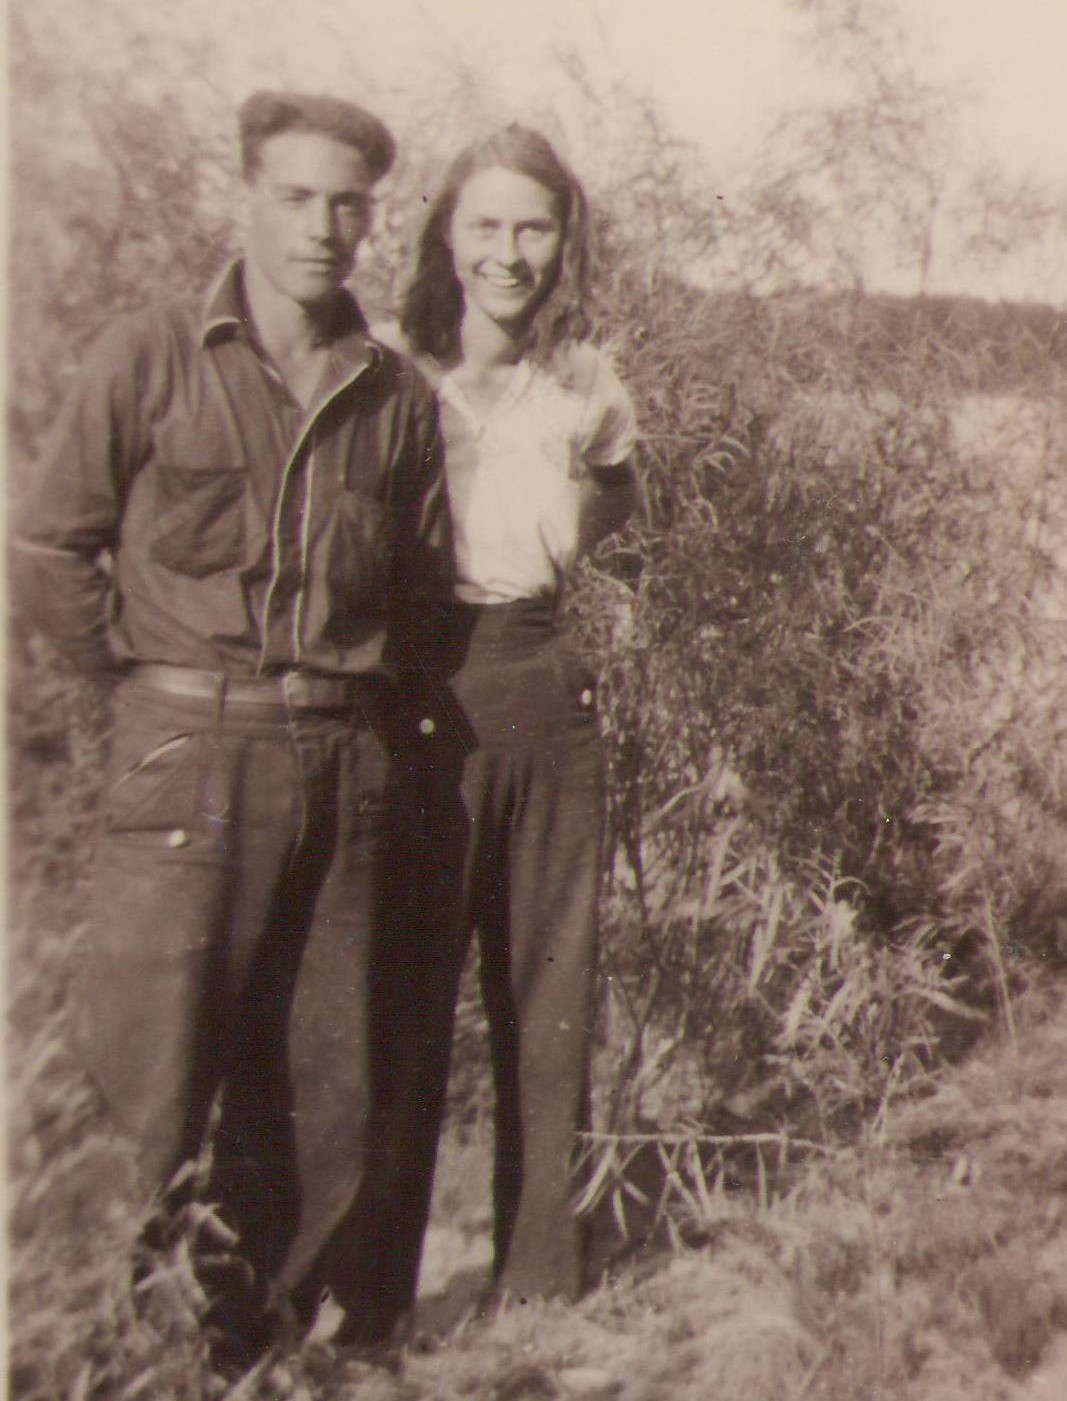 The photograph of these young adults is dated 1938. They are standing on the banks of the river and it almost seems as though they are hiding something - both arms behind their backs! If you know who they are or what they may be up to - let us know! 
990.4.42.11 / Haessel, Karl